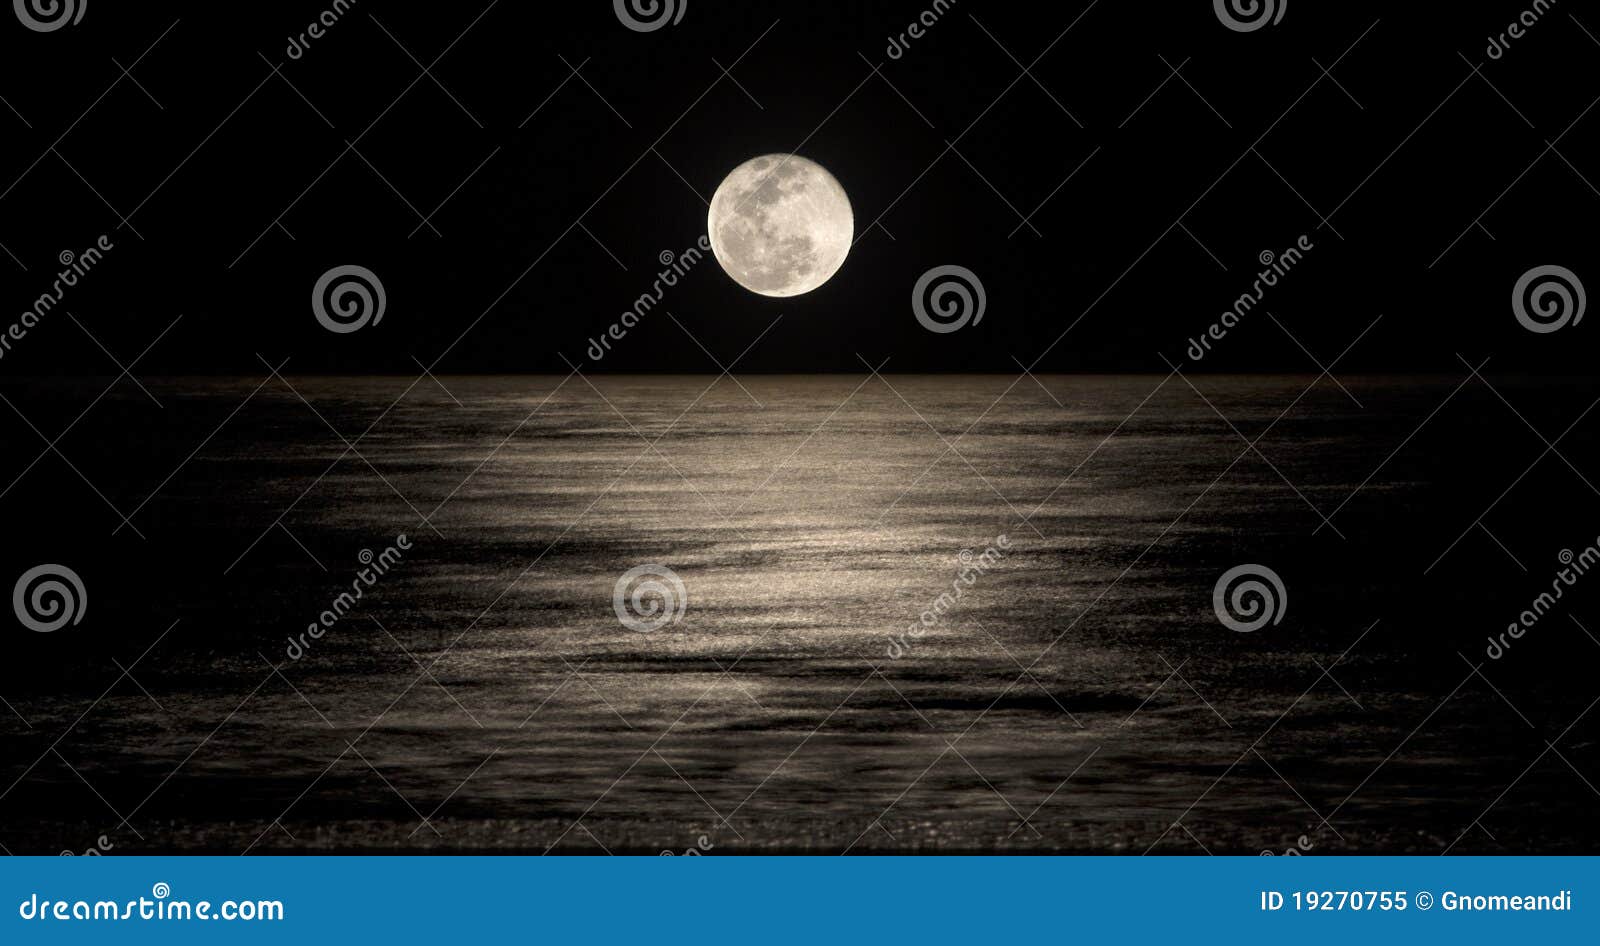 Moon Ray stock image. Image of full, river, reflection - 19270755